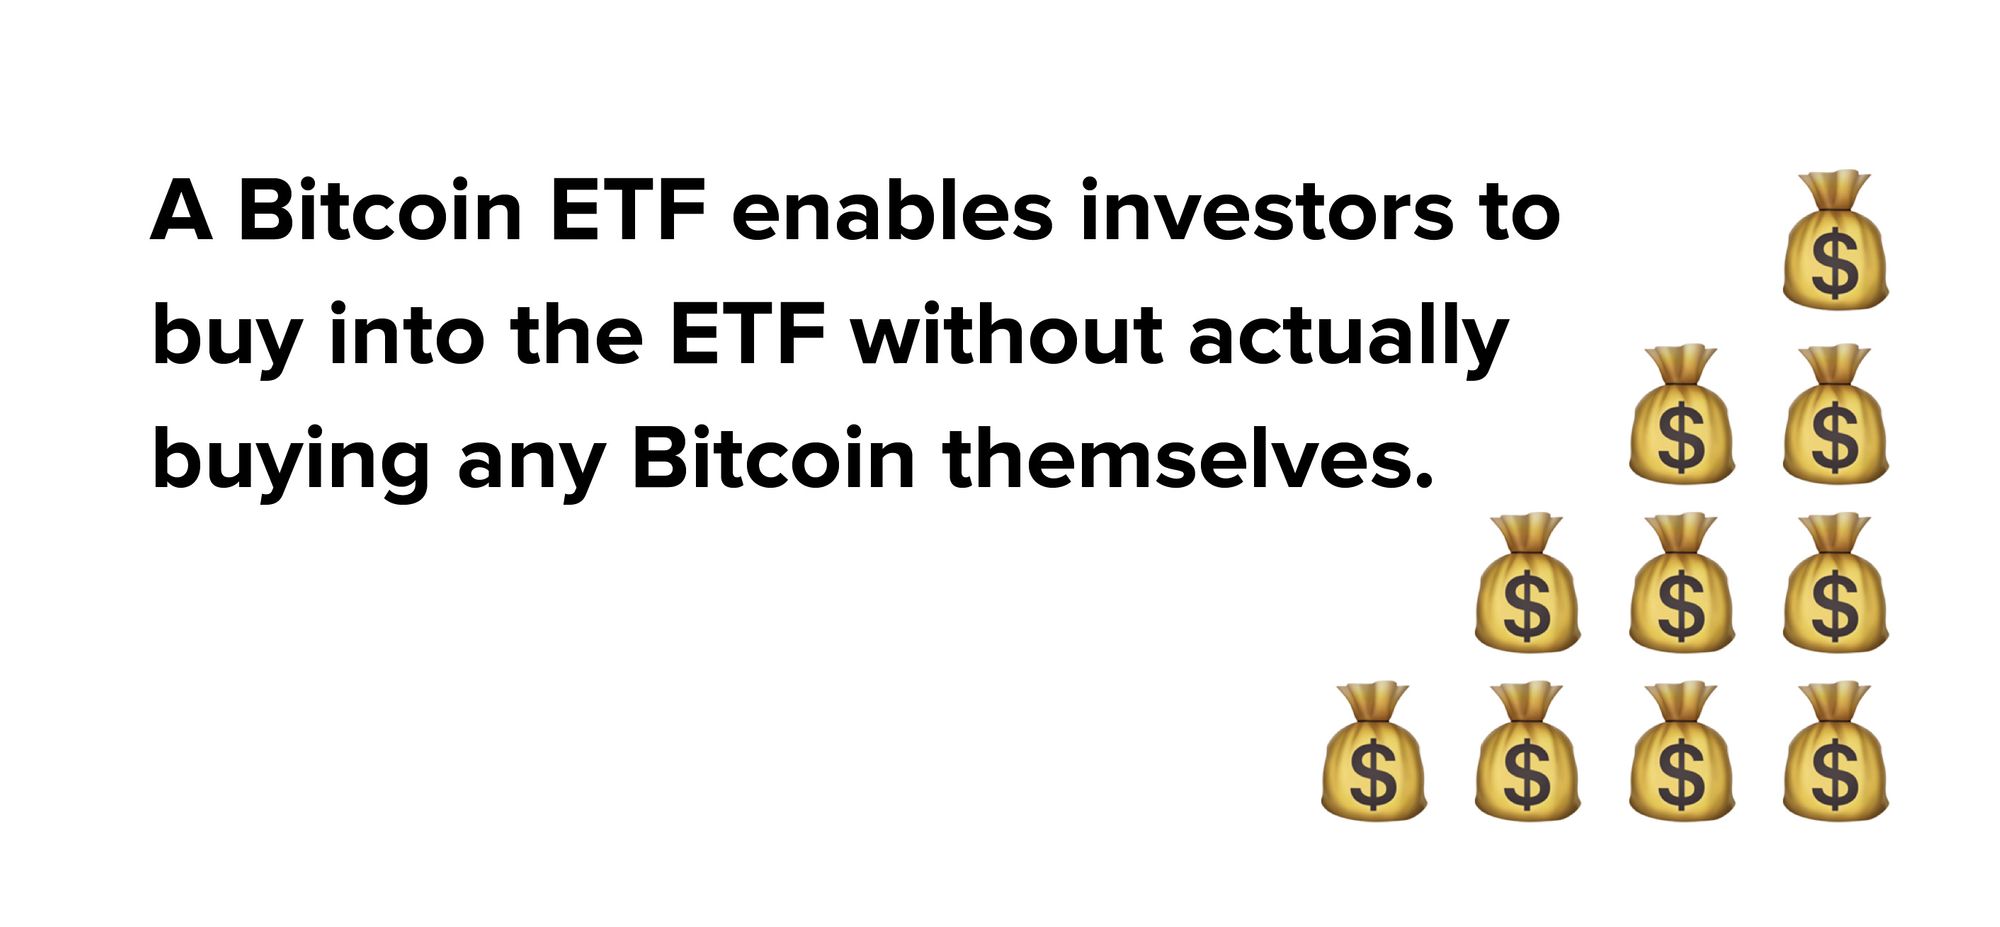 BITO enables investors to buy into the ETF without actually buying any bitcoin themselves.